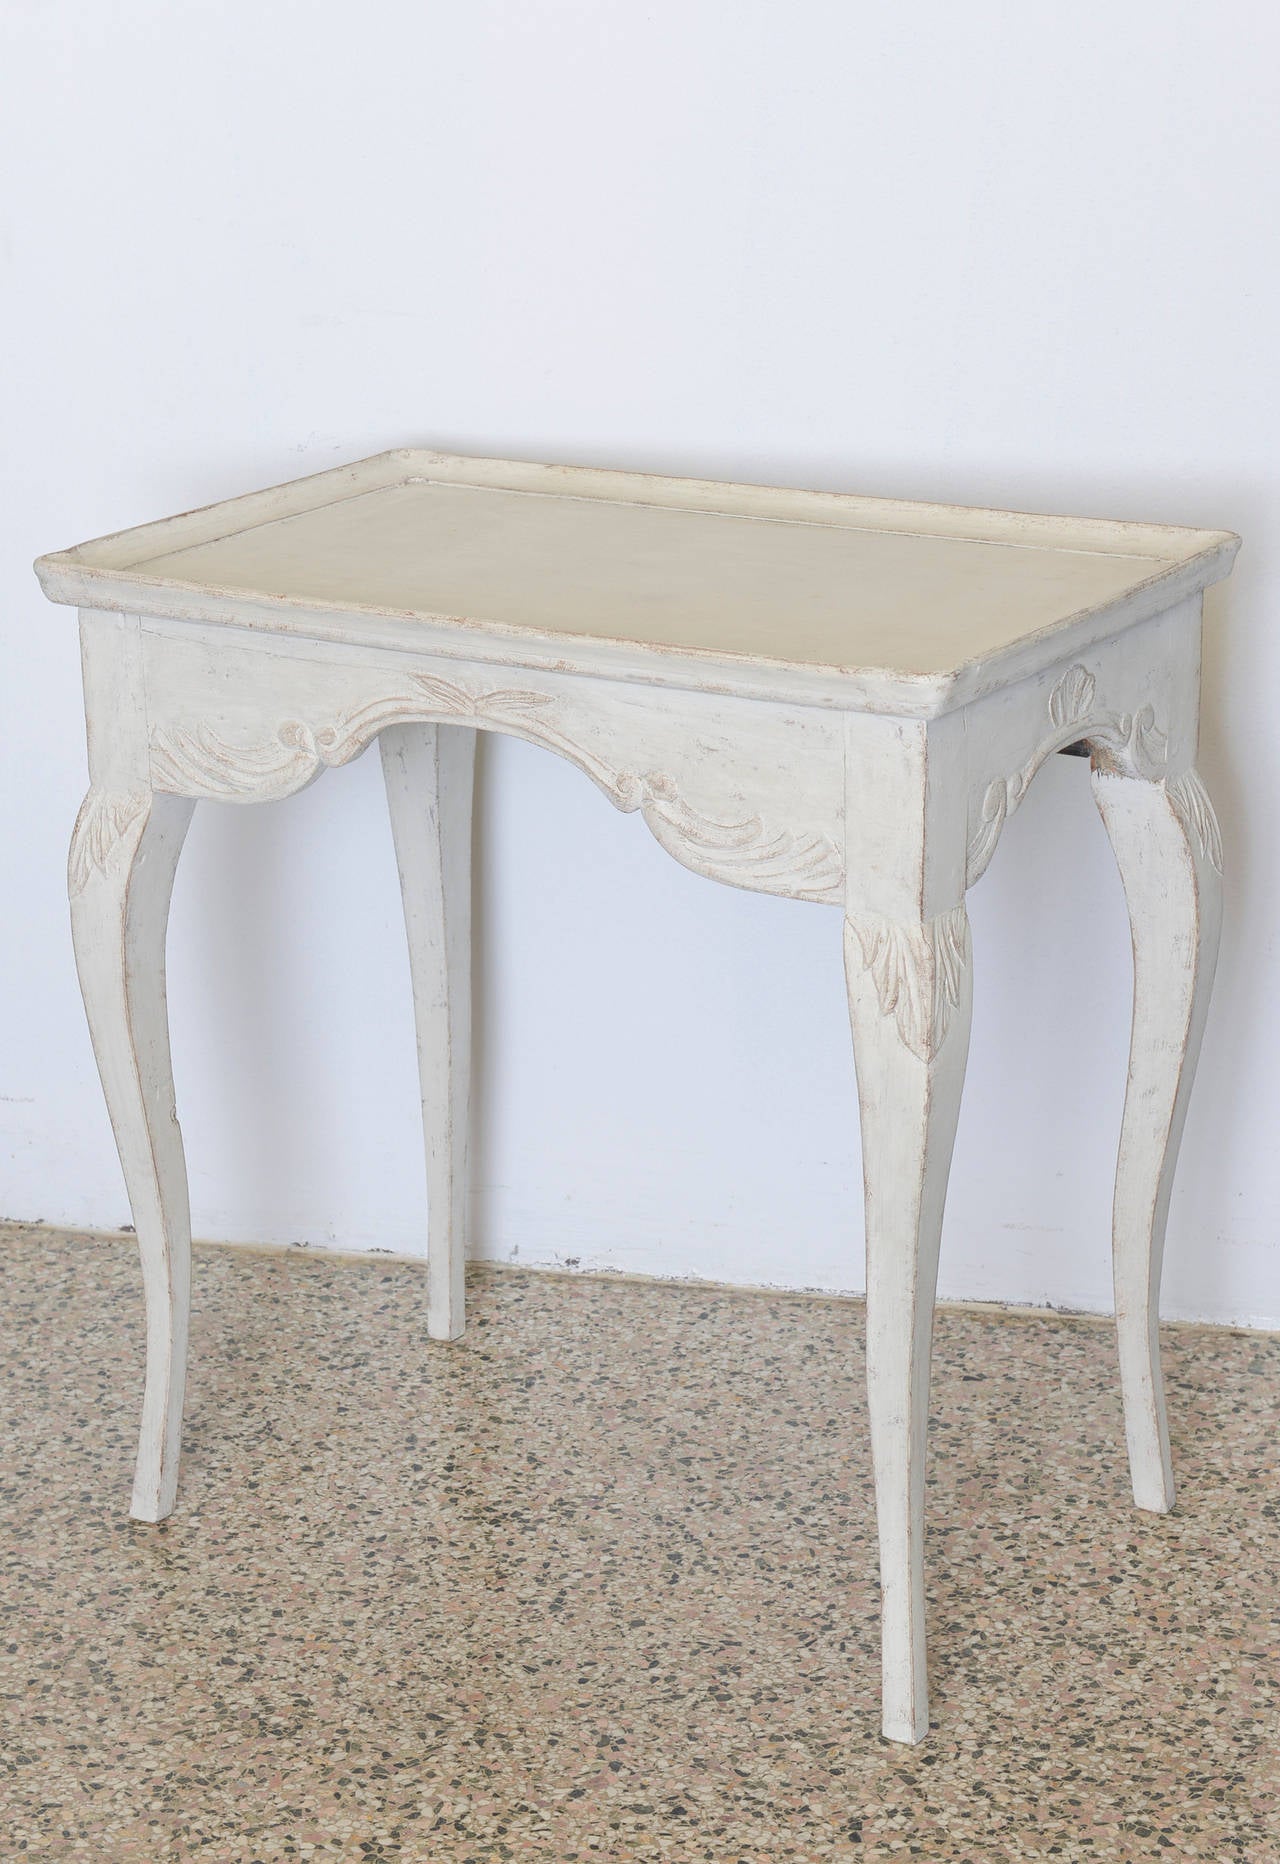 Late 18th Century Antique Swedish Gustavian Table. This lovely table has graceful cabriole legs and a framed top. The curved apron is carved in a shell and acanthus leaf motif. The paint is refreshed in a light grey-white distressed wash.

28.50 in